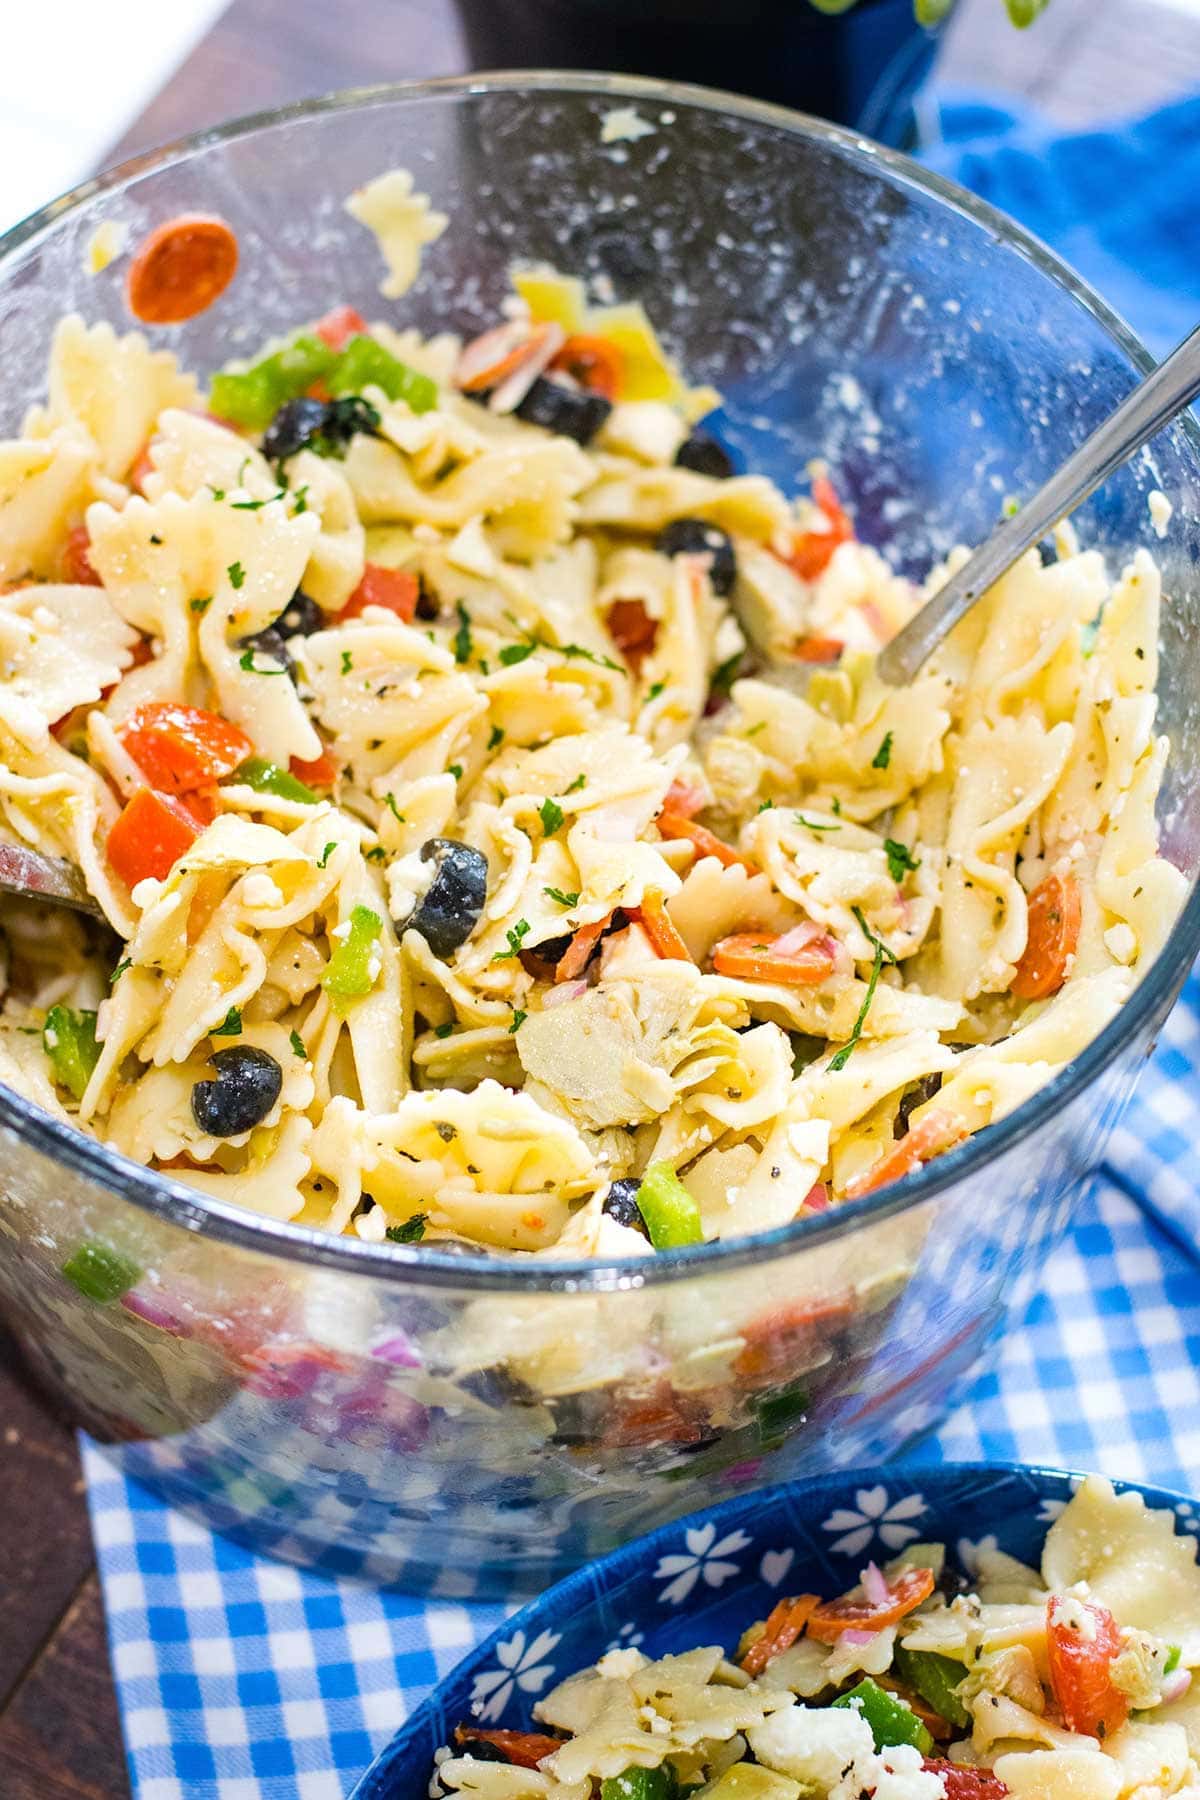 Bowl of tossed pasta salad with artichoke hearts and feta cheese